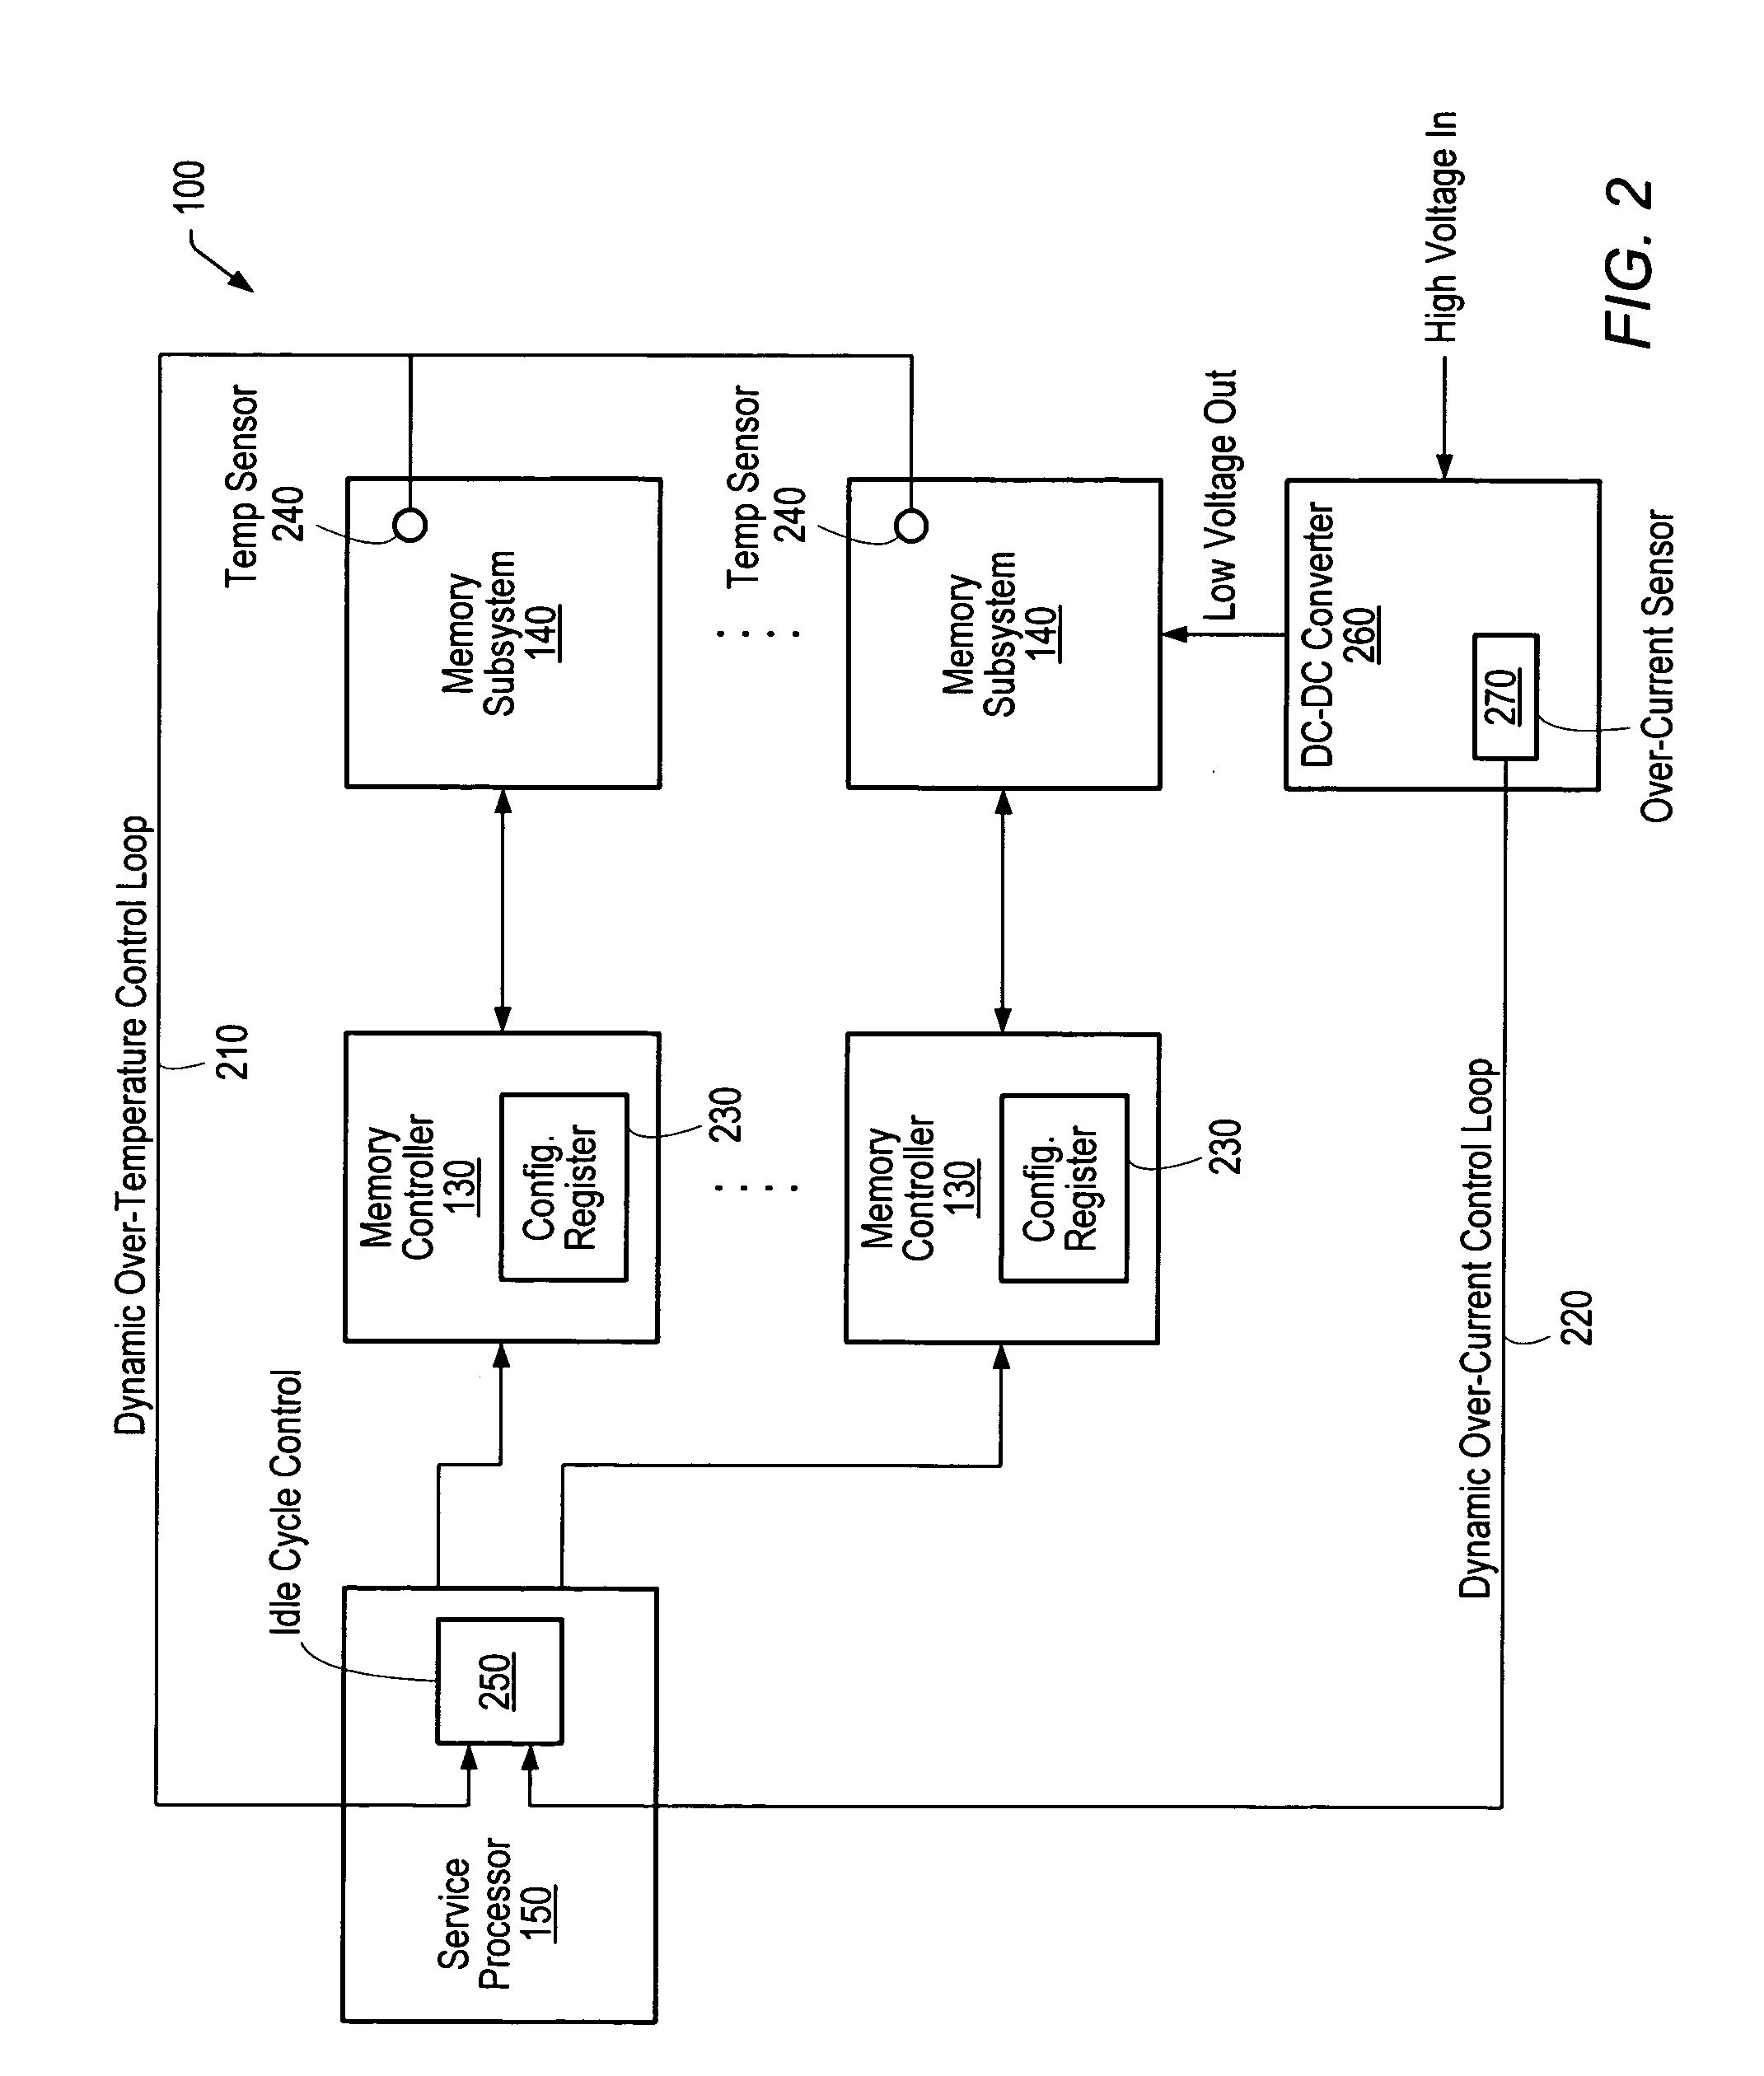 Dynamic memory throttling for power and thermal limitations